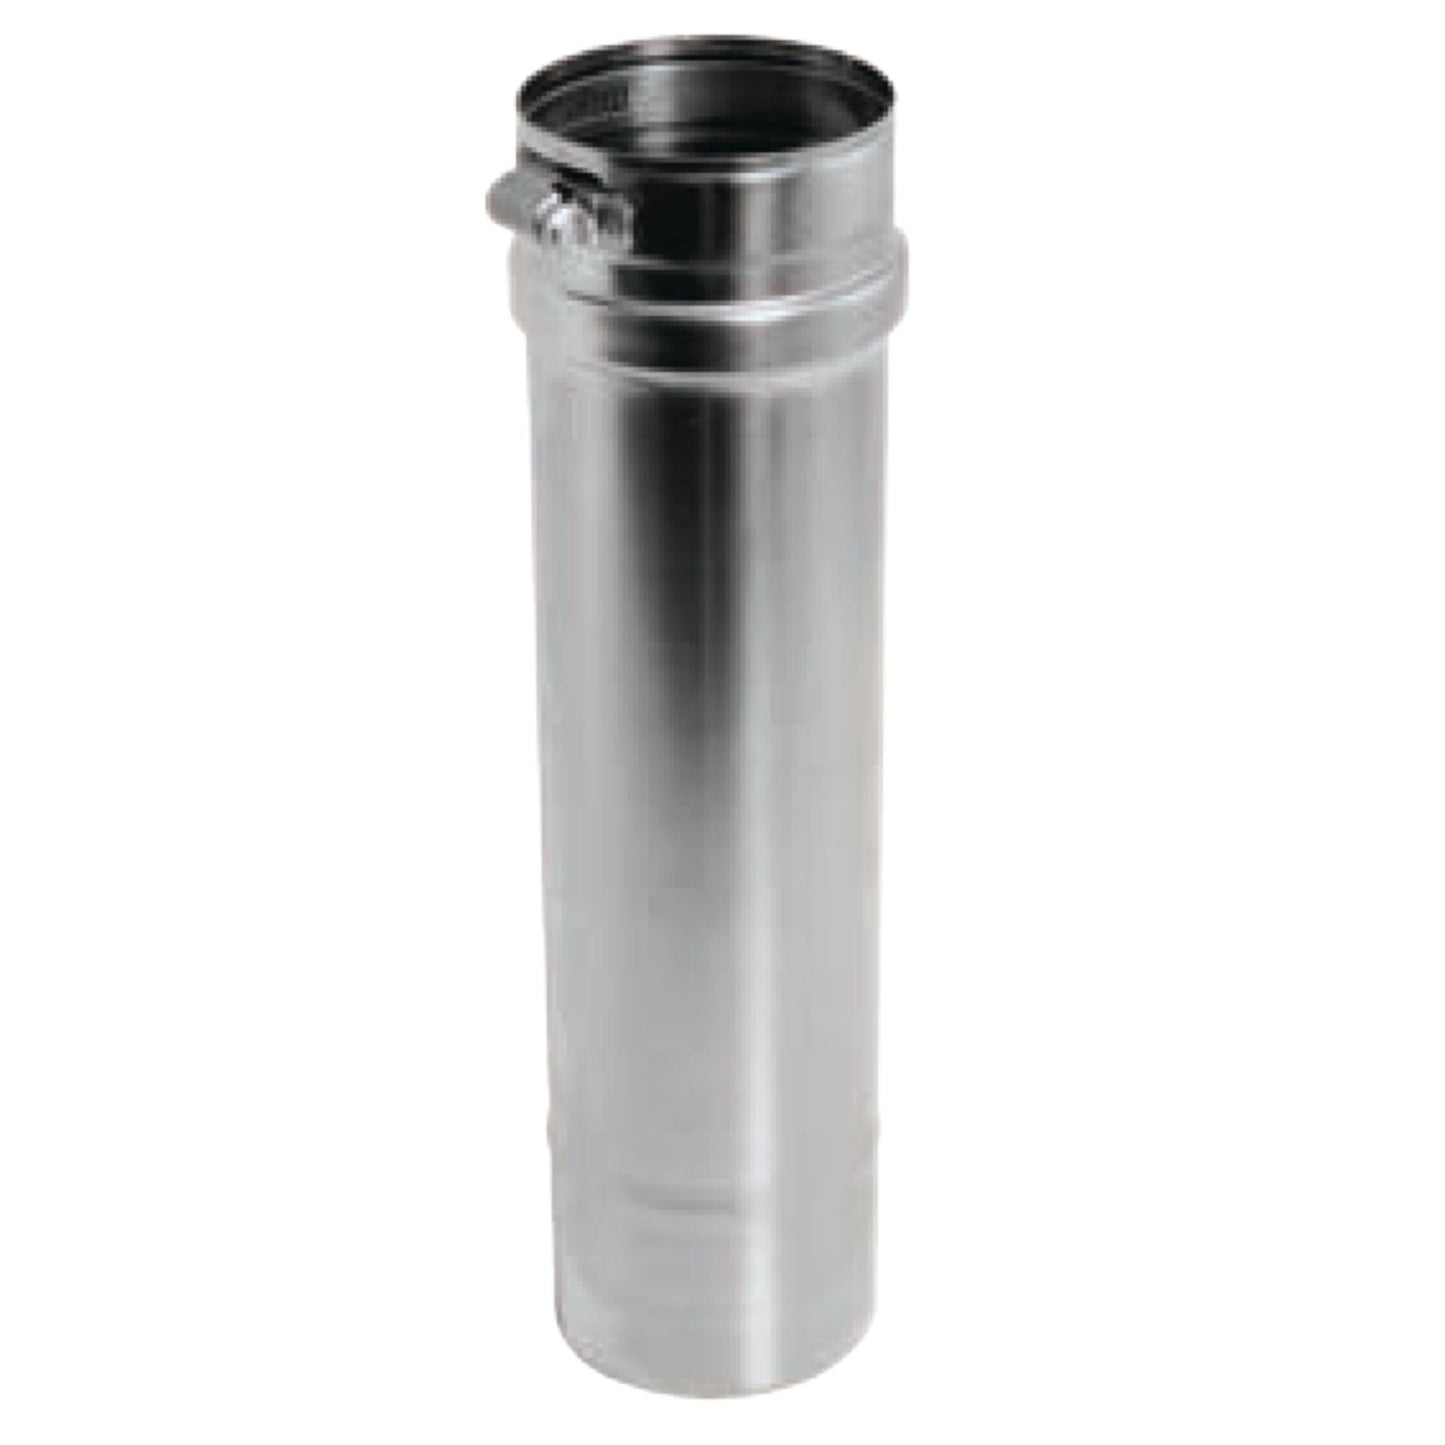 DuraVent FasNSeal 8" x 12" 29-4C Stainless Steel Vent Length